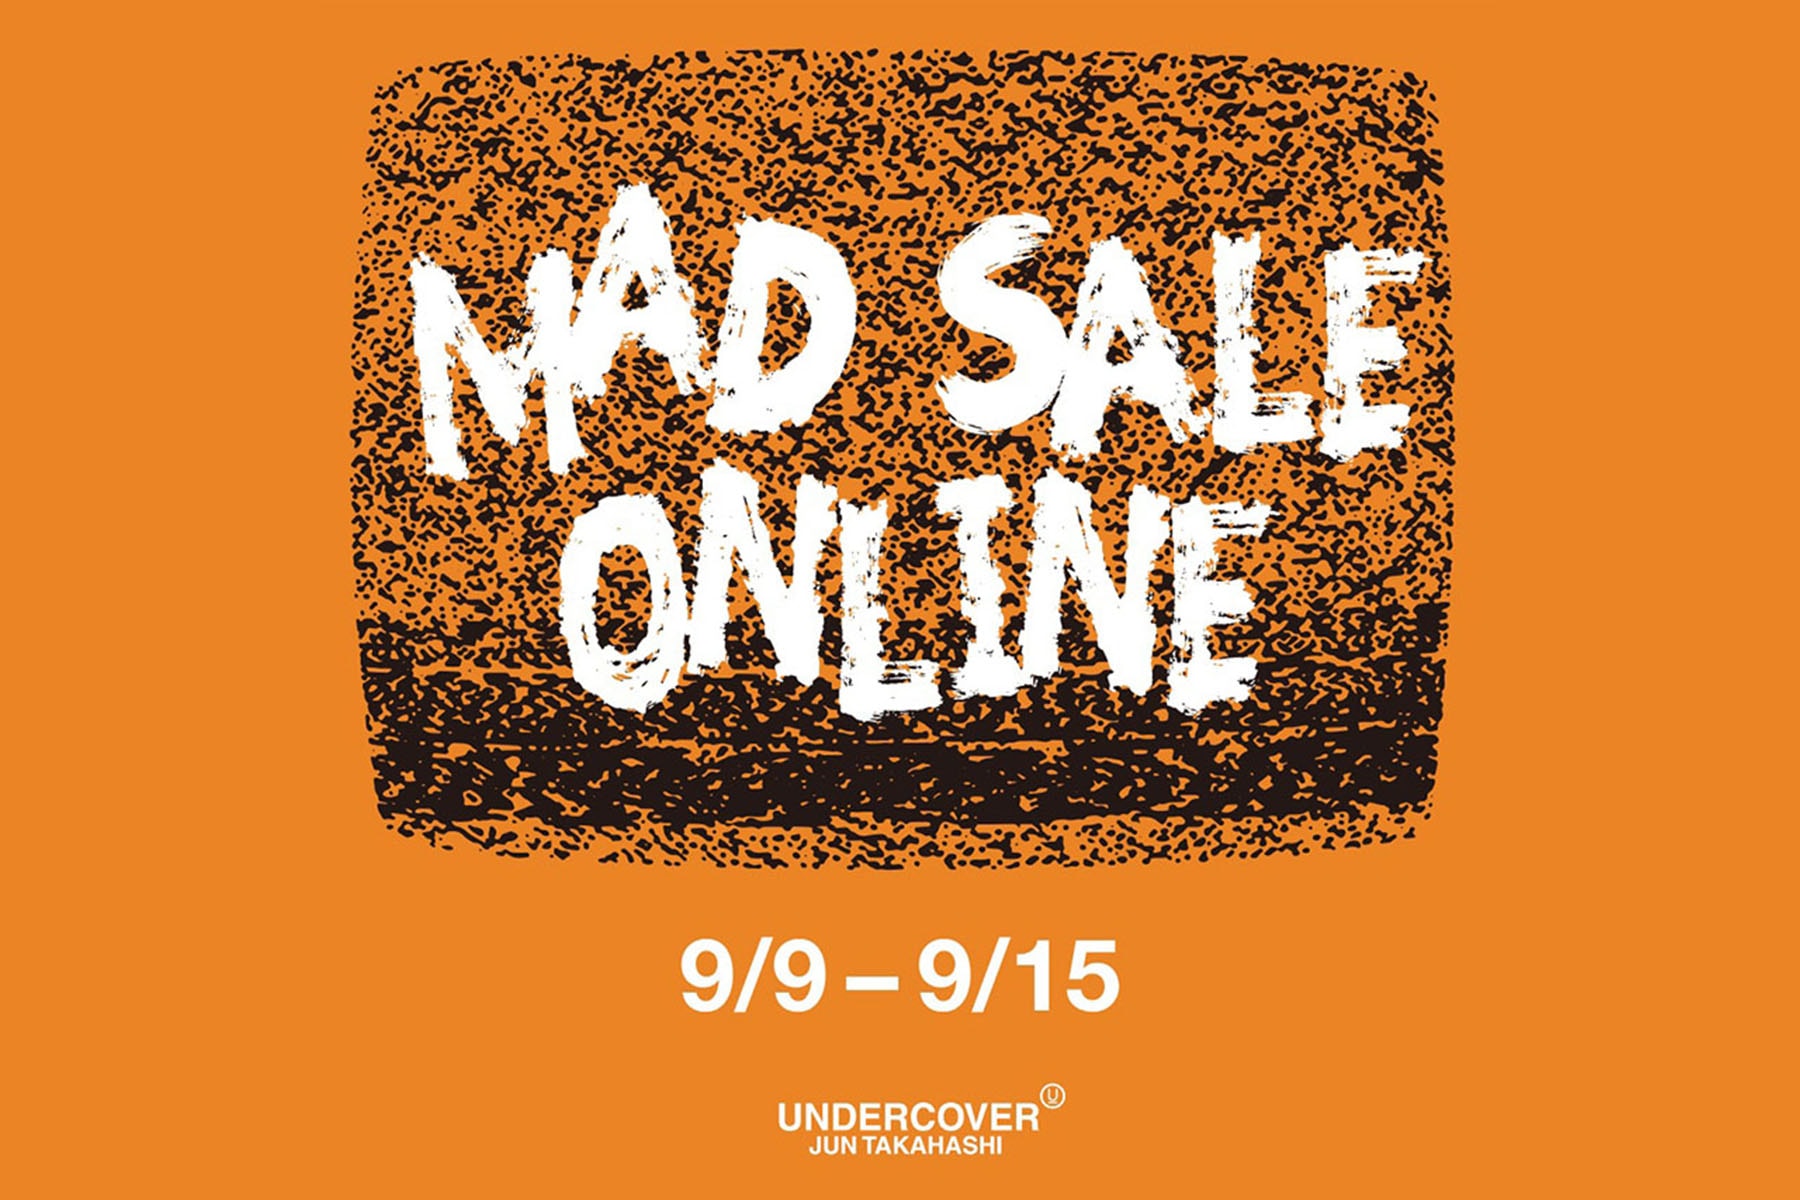 UNDERCOVER 限定折扣活動 MAD SALE ONLINE 正式展開